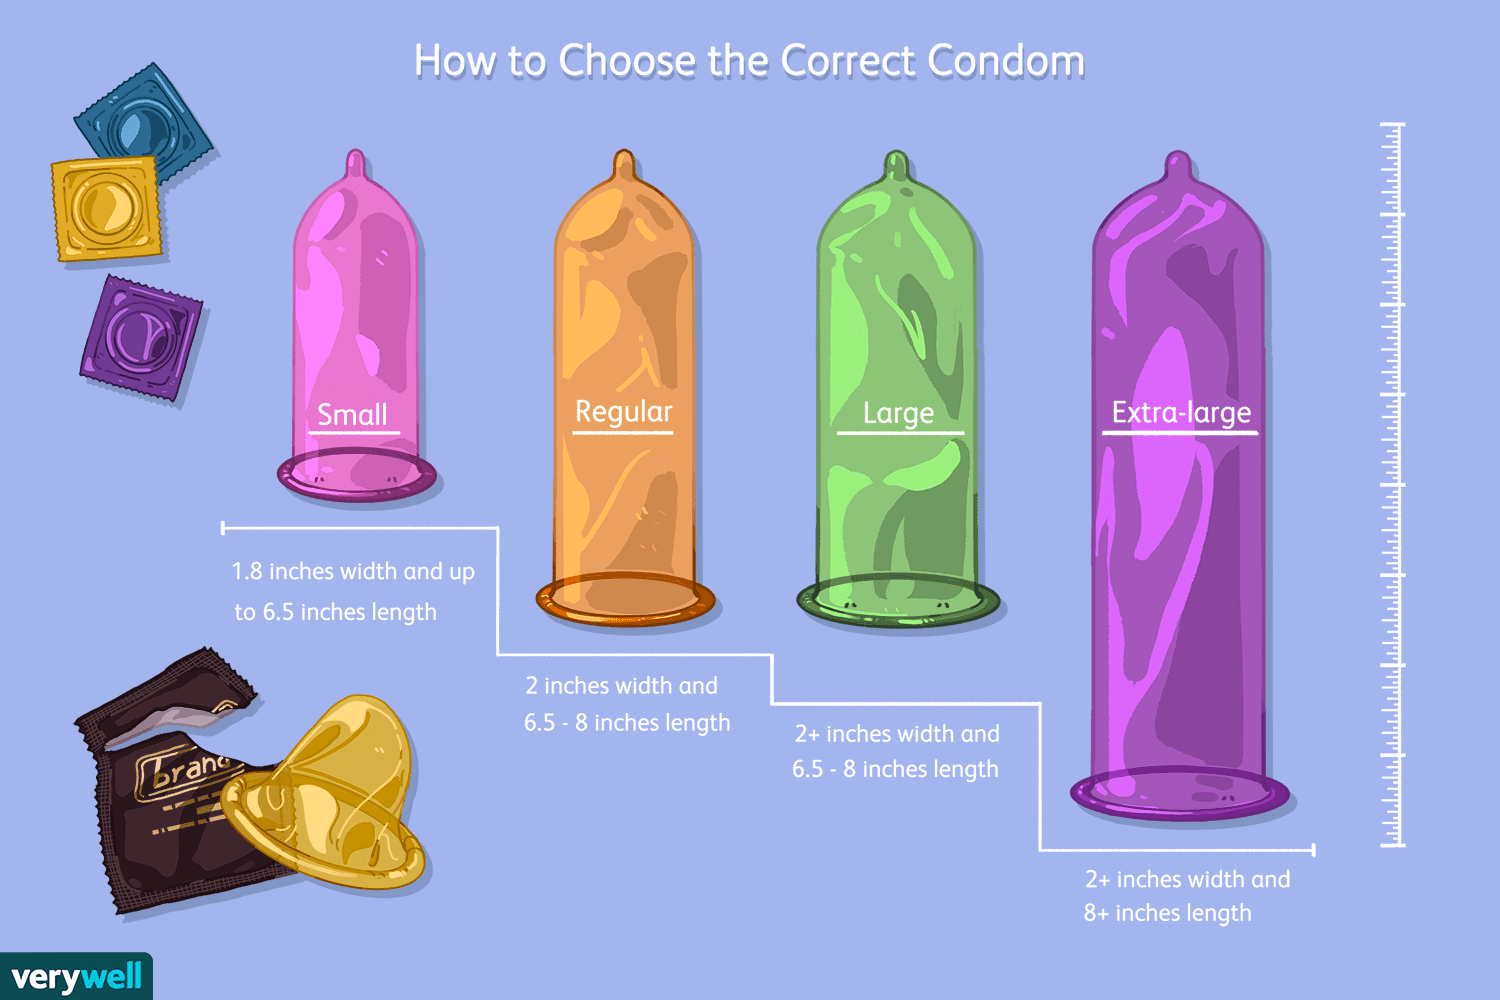 chris kuchler recommends trojan condoms sizes in inches pic